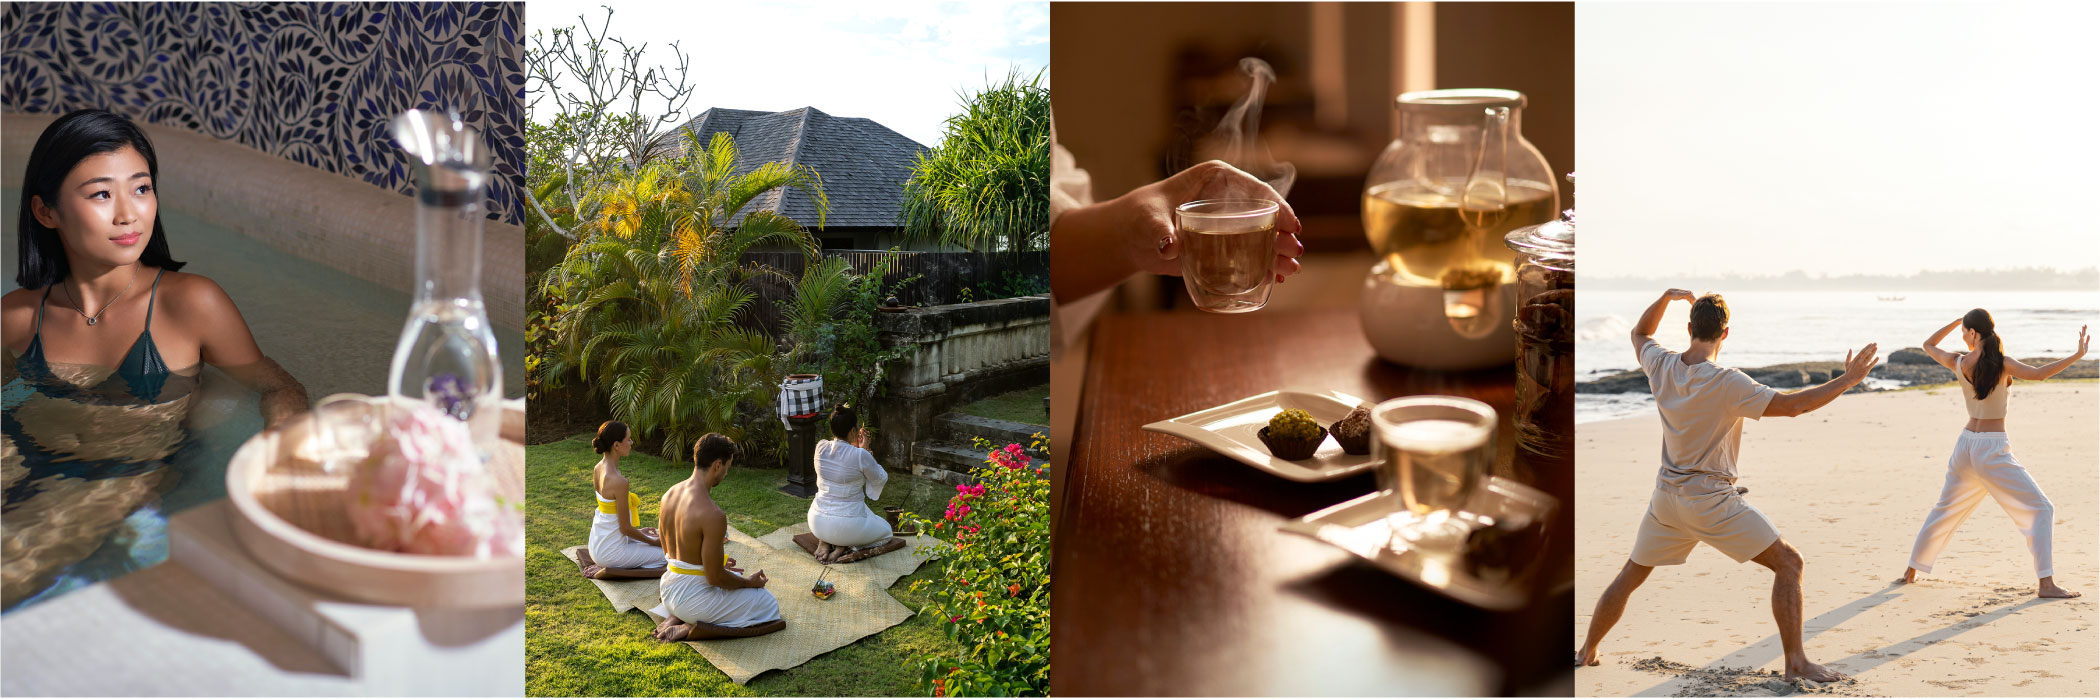 Raffles Bali - Raffles Hotels & Resorts launches ‘Retreat by Raffles’, a Collection of Curated Well-being Retreats for the Mindful Traveller